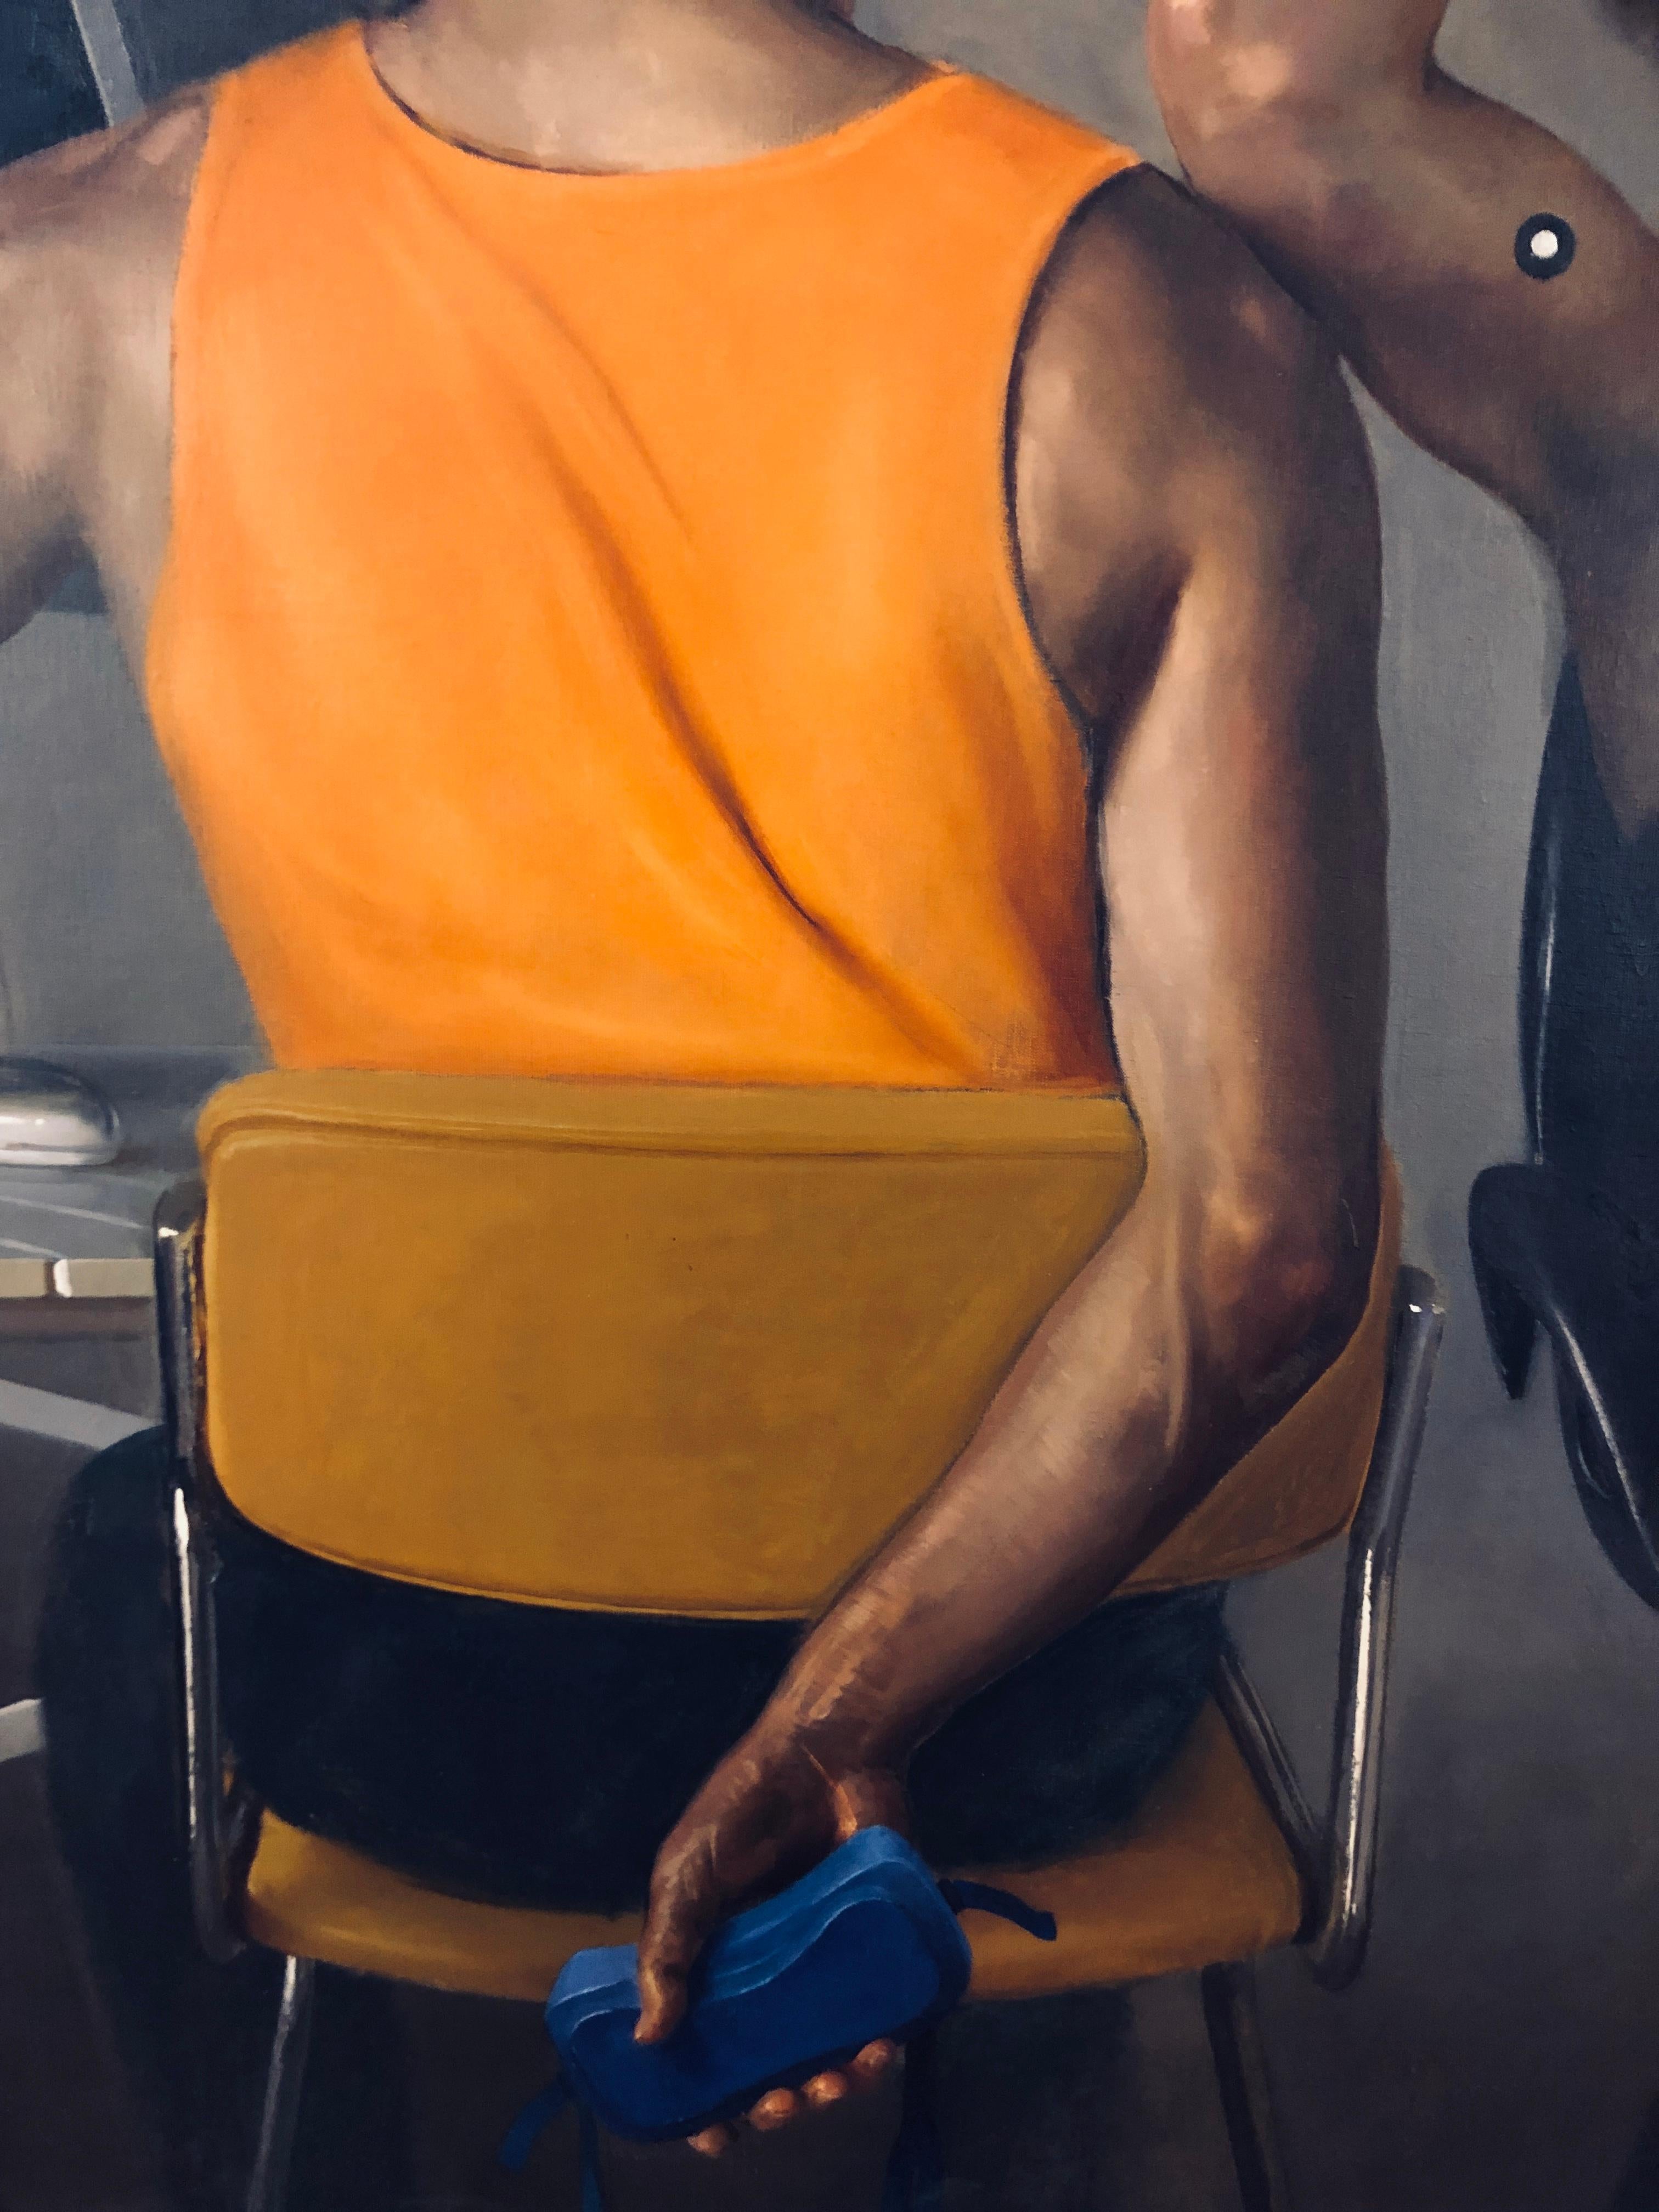 Artist Statement—Motion Capture Studio Series.  Andrew S. Conklin, a native of Chicago, Illinois, is a figurative painter. Conklin's paintings are a product of his direct interaction with the figure model, unmediated by photography. While he uses